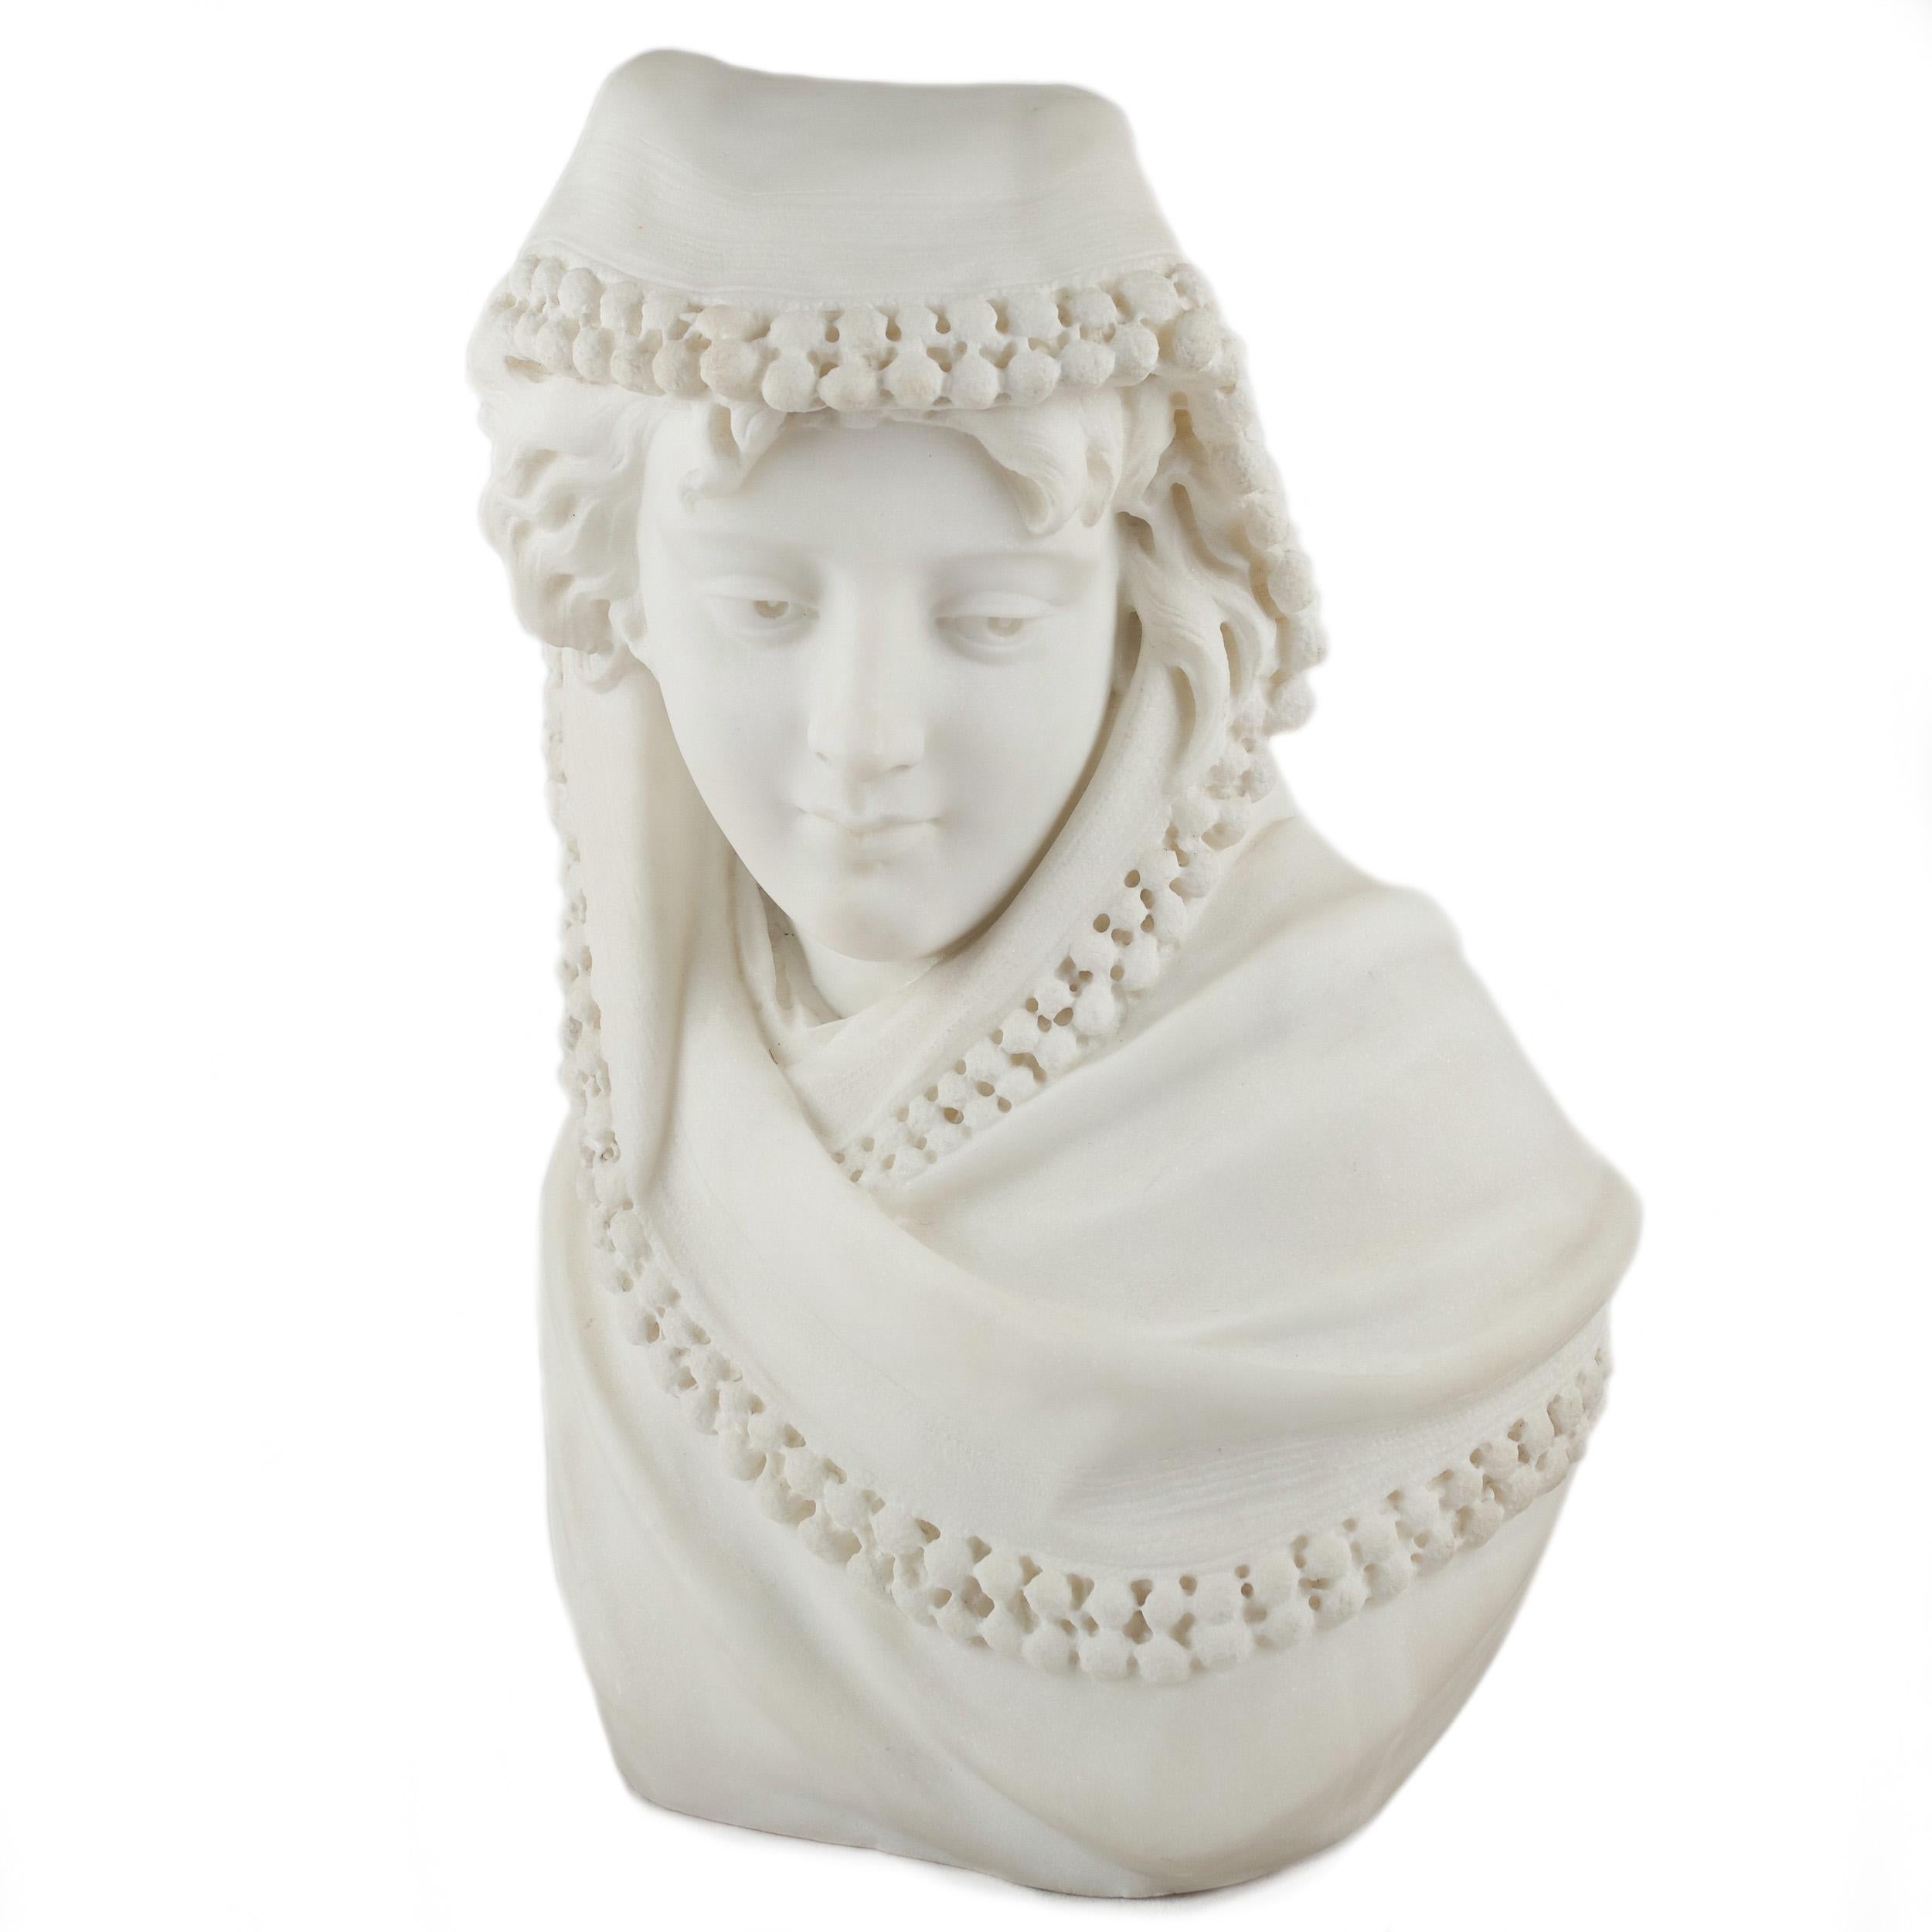 An exquisite late 19th century bust of a Provincial young woman carved from a single block of Carrara marble, the ability of the unknown sculptor to capture movement and spirit is notable. Her feminine features are soft and confident, totally at